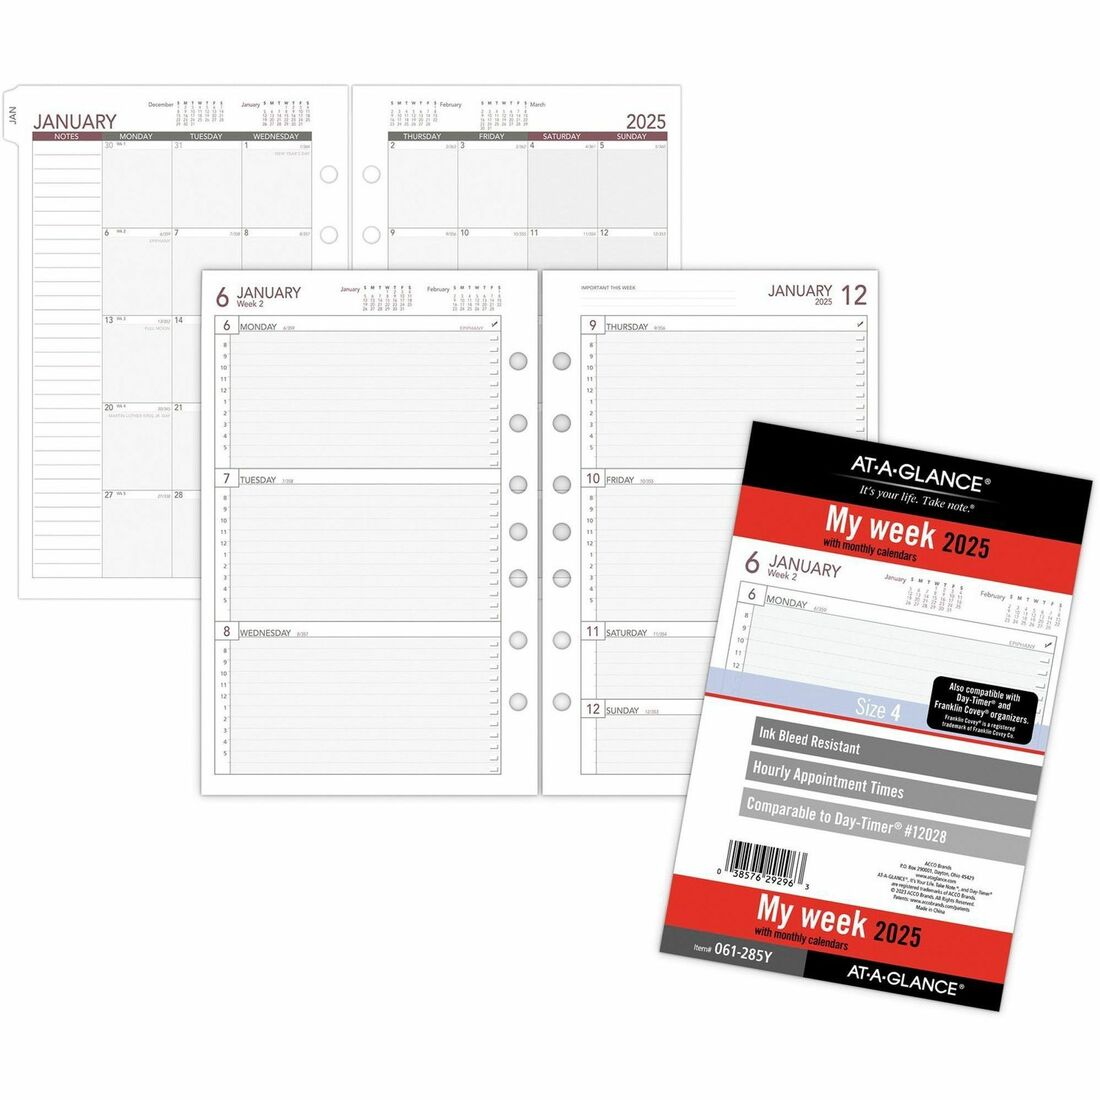 At-A-Glance 2024 Weekly Planner Refill, Loose-Leaf, Desk Size, 5 1/2" x 8 1/2" - Business - Julian Dates - Weekly - 1 Year - January 2024 - December 2024 - 8:00 AM to 5:00 PM - Hourly, Monday - Friday - 1 Week Double Page Layout - 5 1/2" x 8 1/2" She - 1